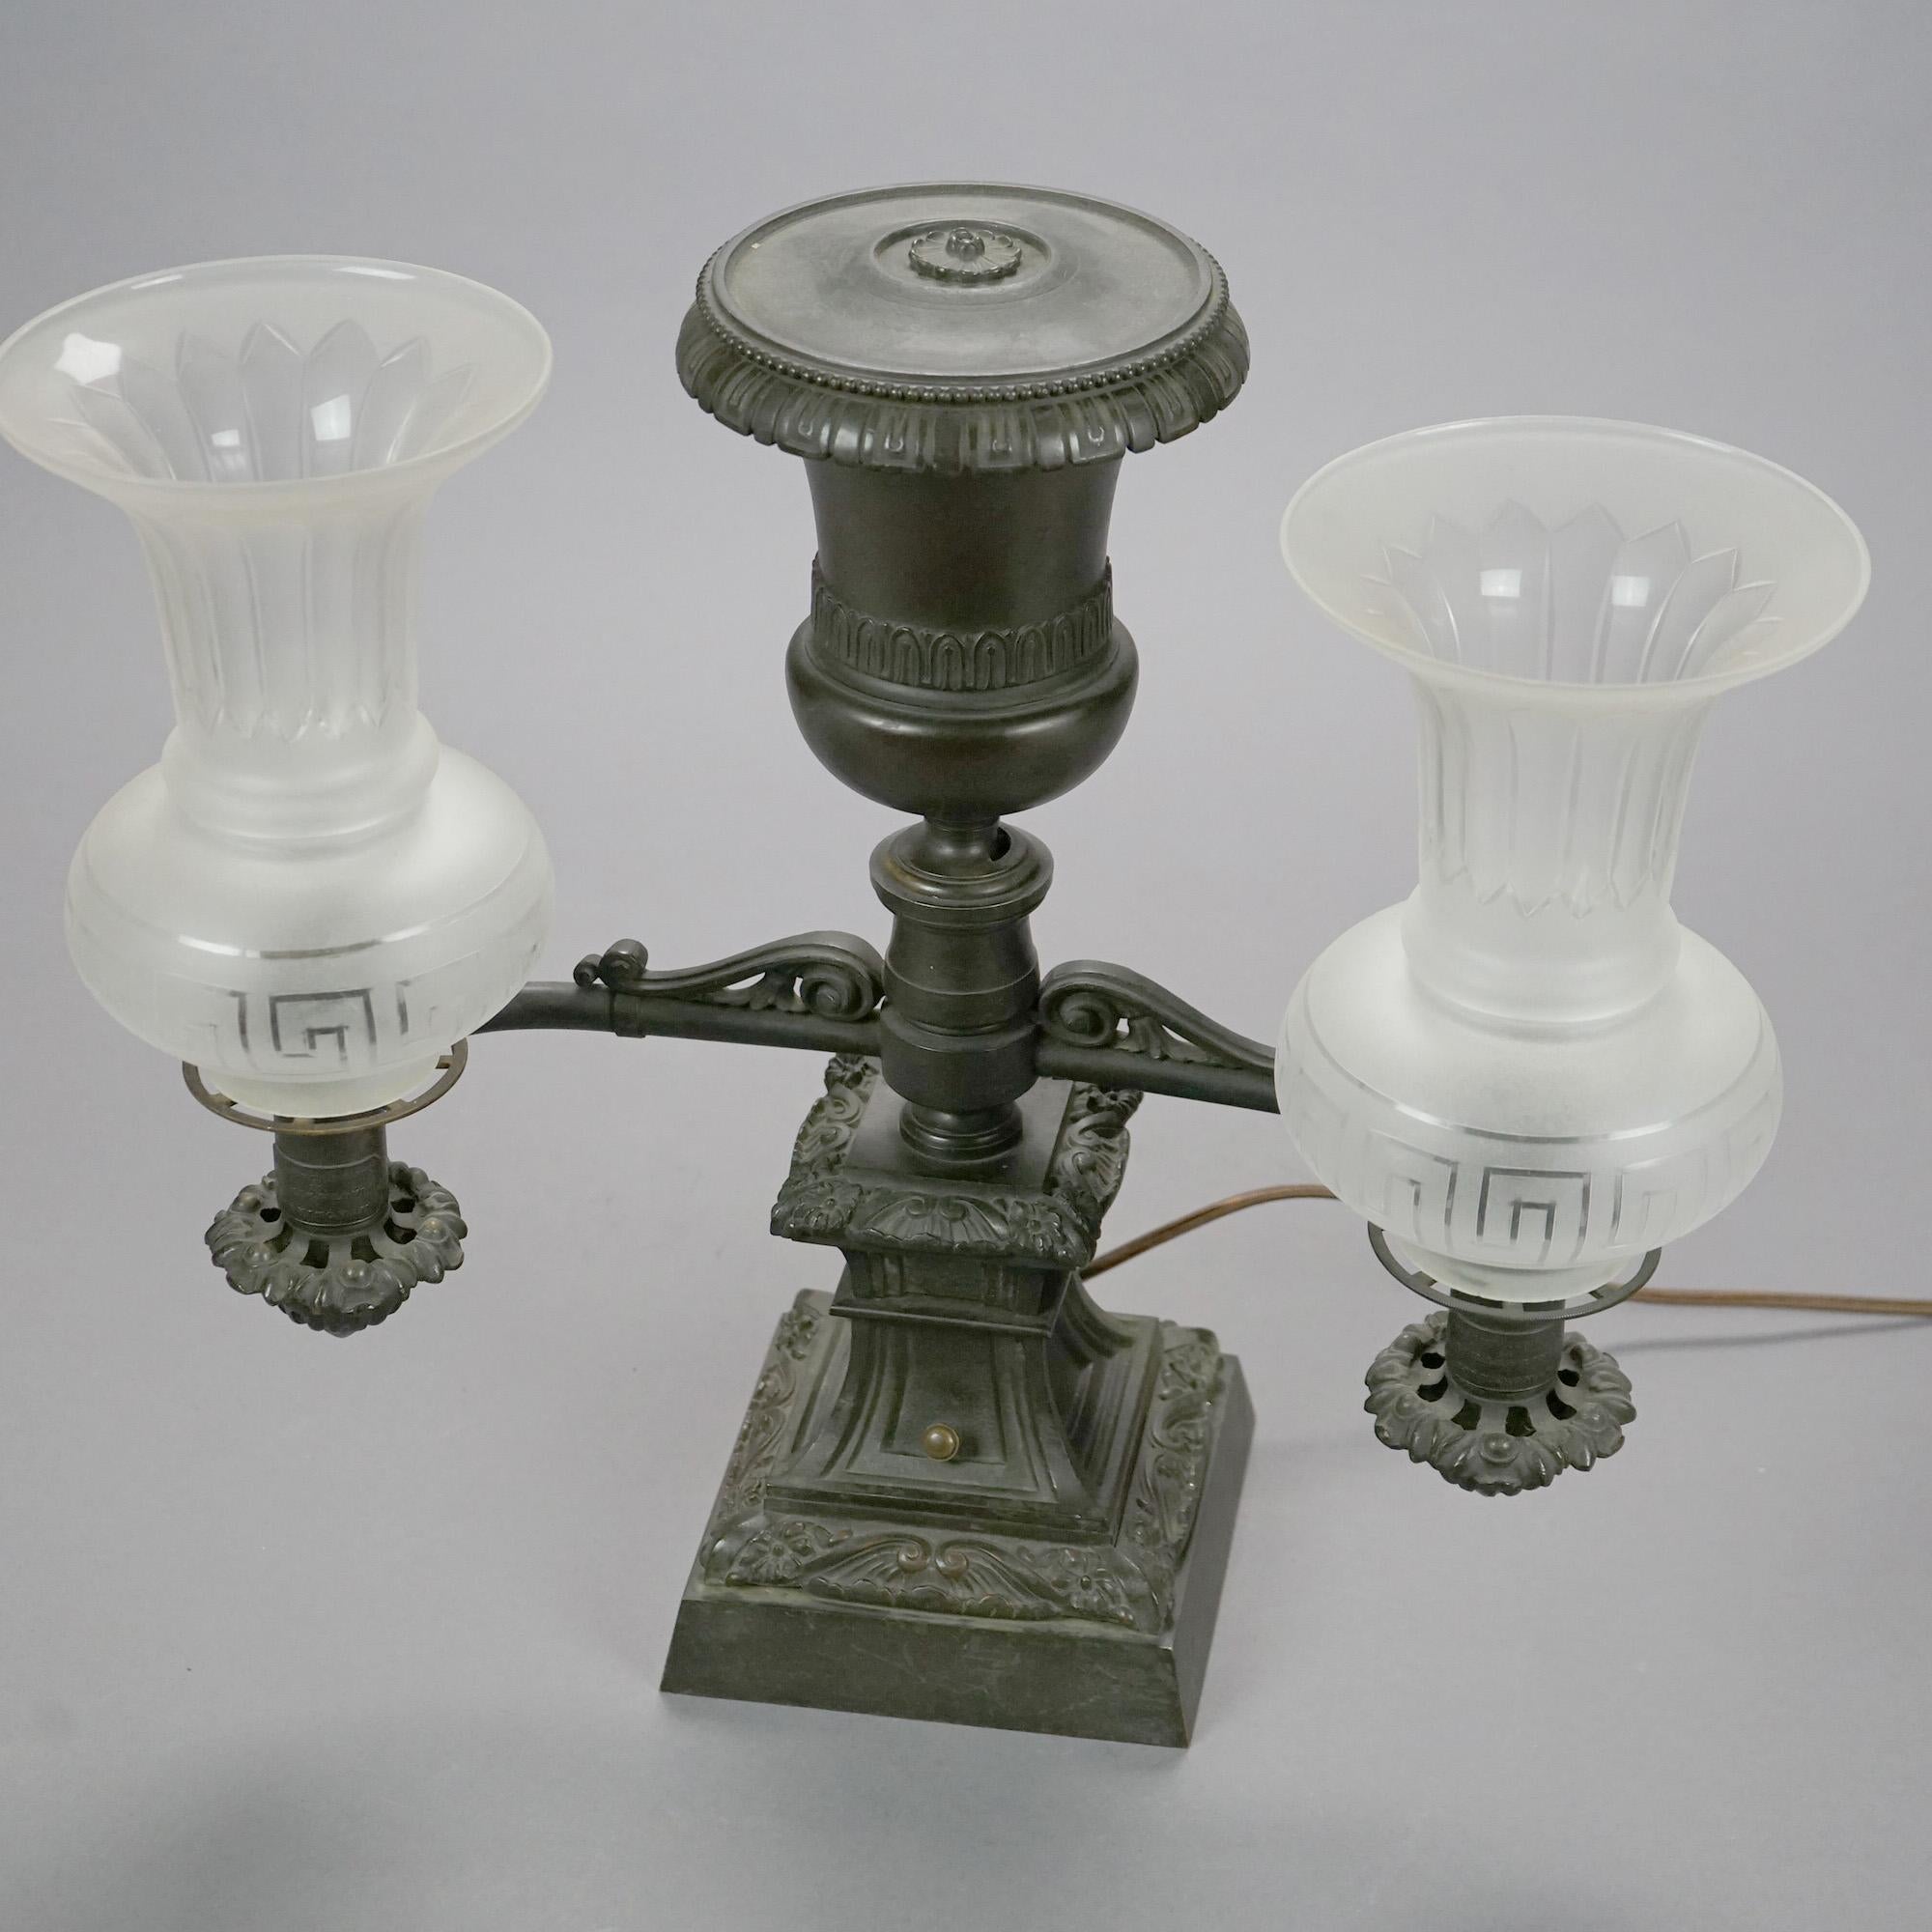 American Antique Pair Messenger Co. Bronze Double Argand Lamps with Etched Shades c1820s